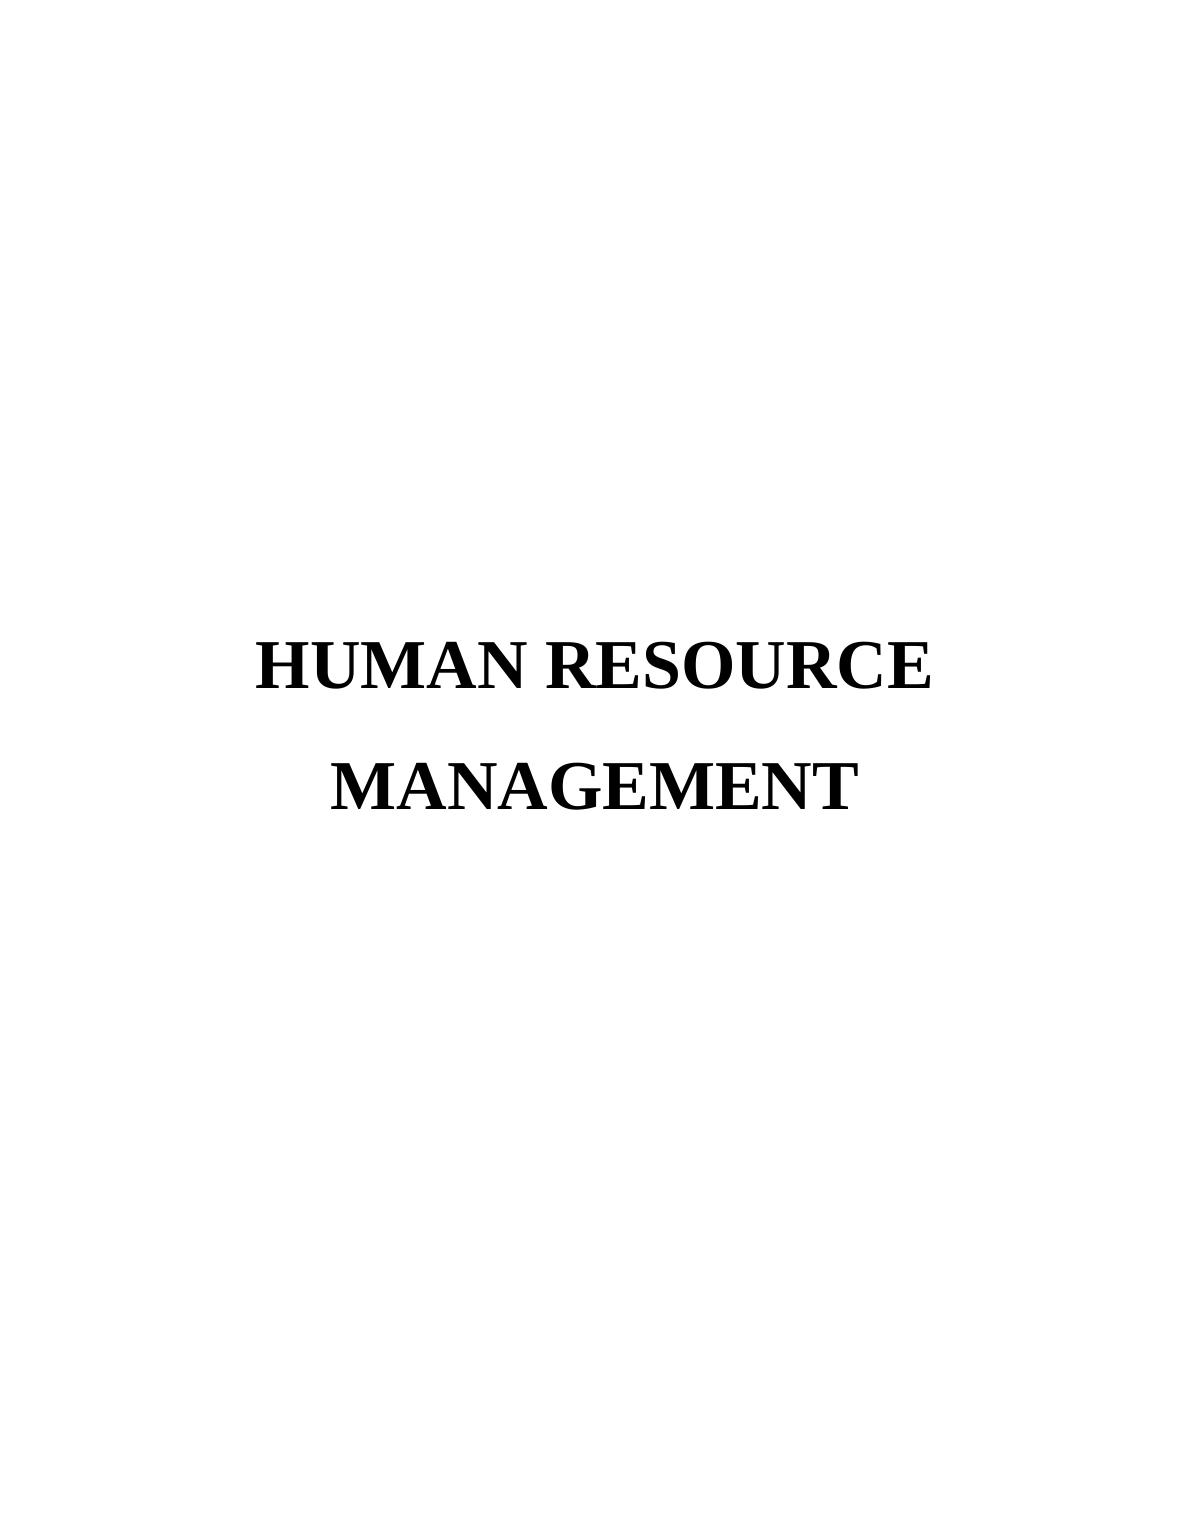 Concept of Human Resource Management | Report_1